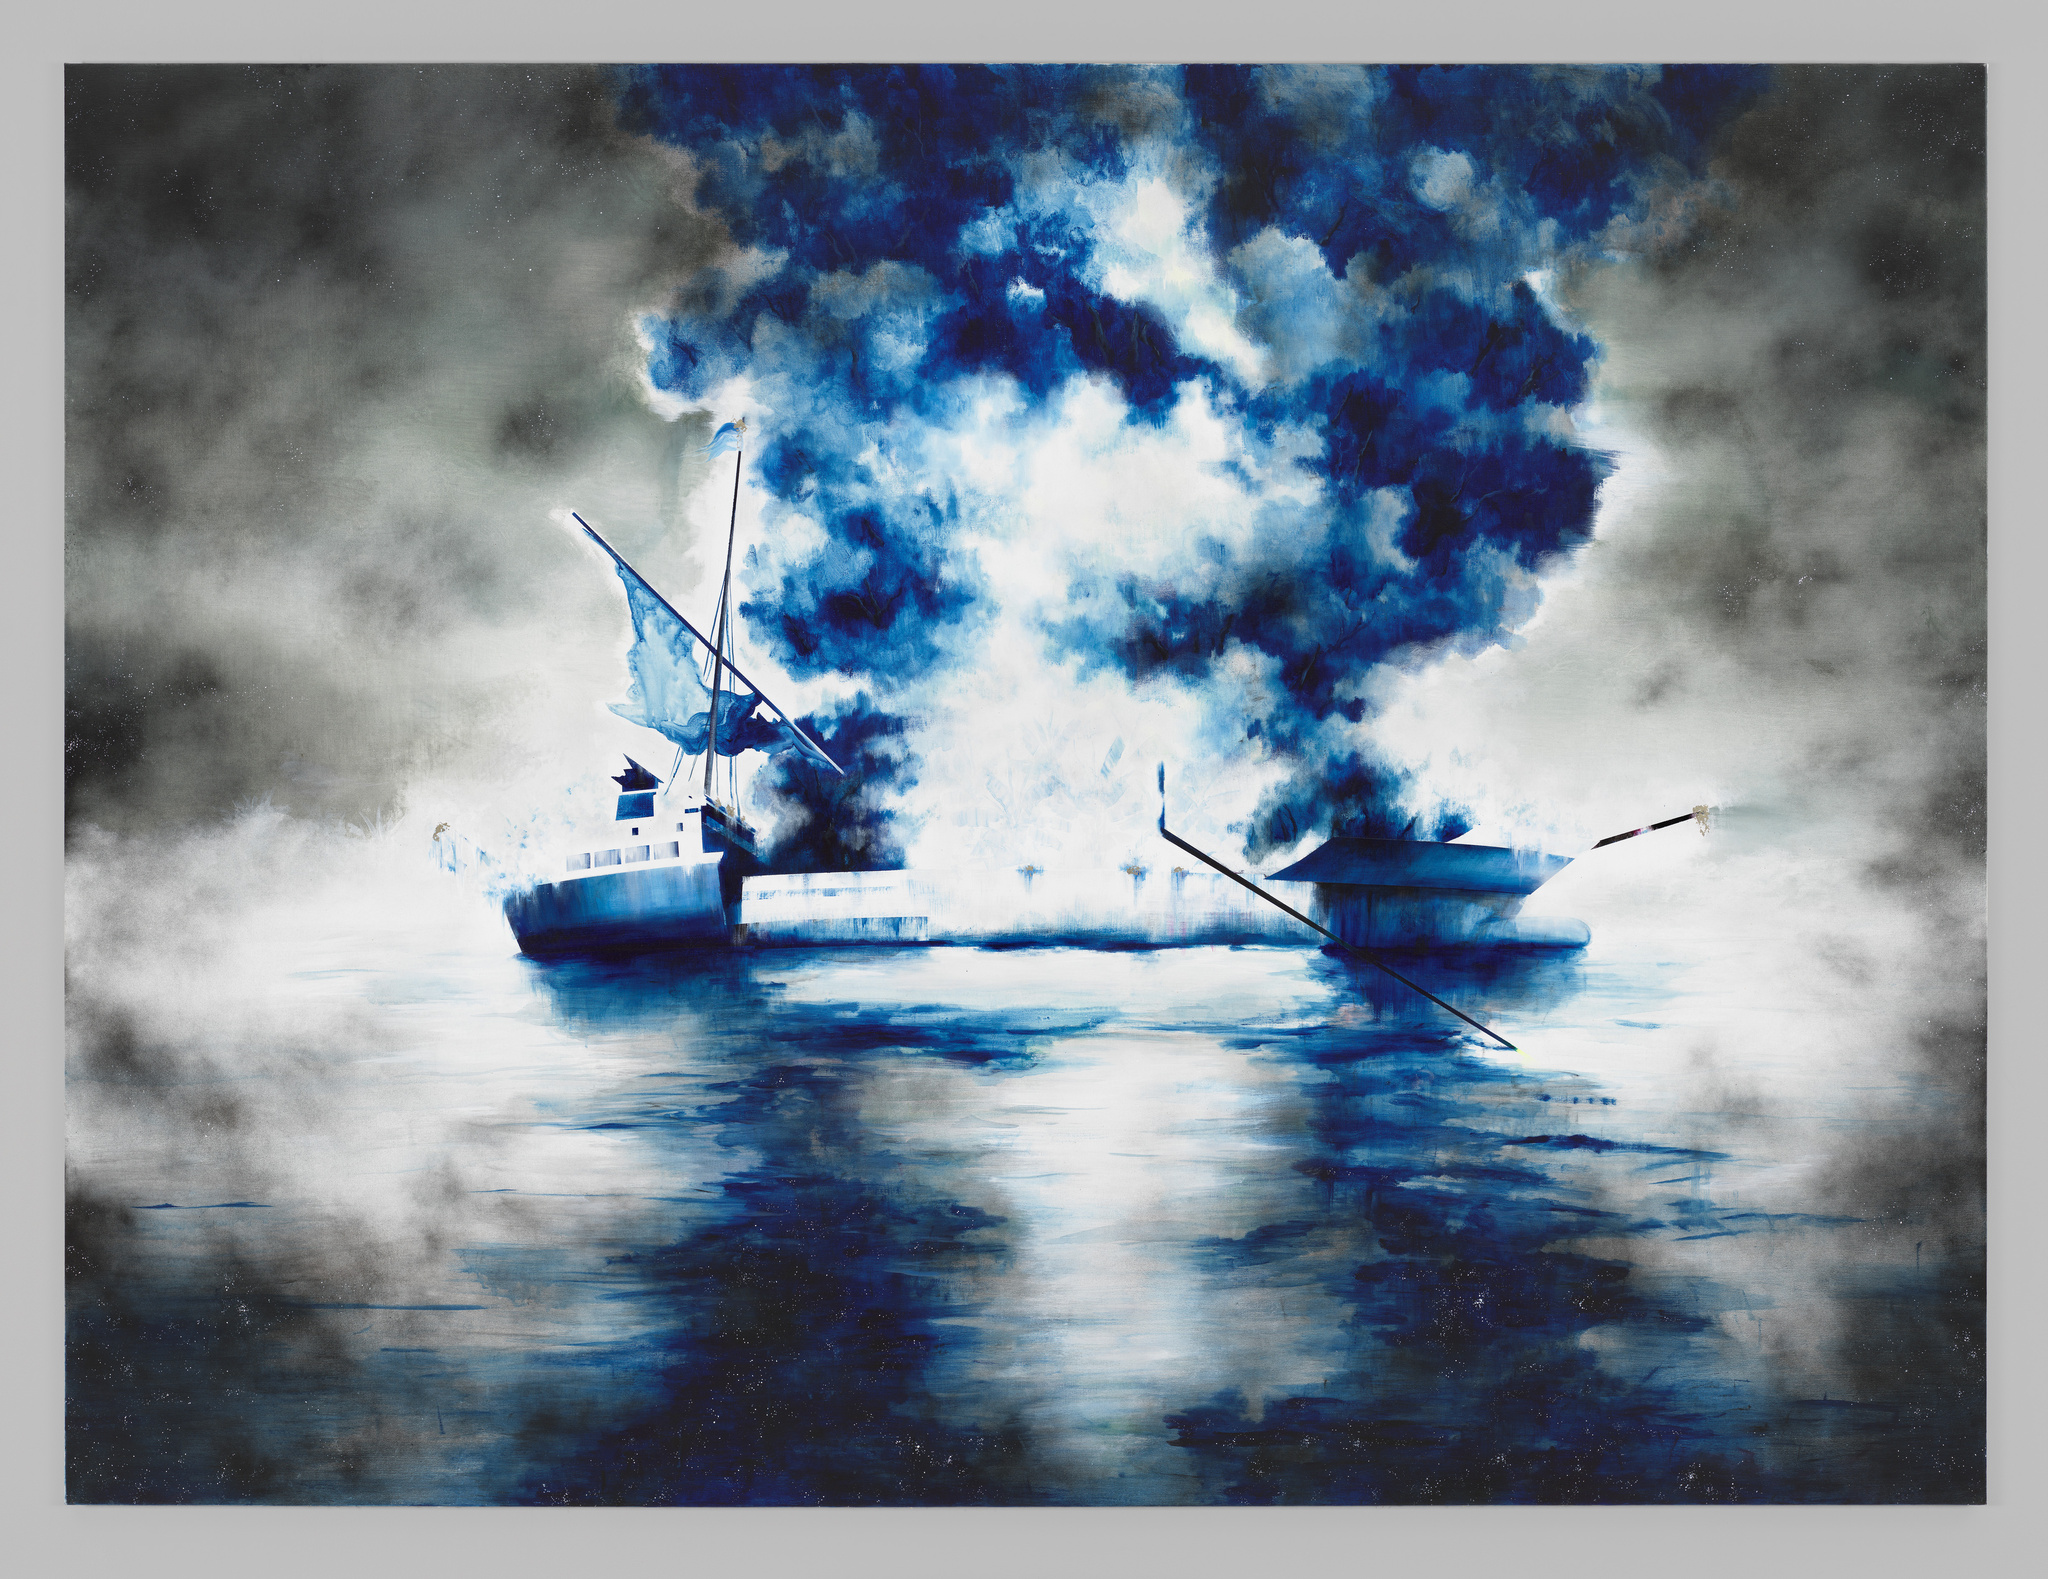 A ship exploding on a sea of dark blues and blacks with heavy contrast of white clouds and smoke.